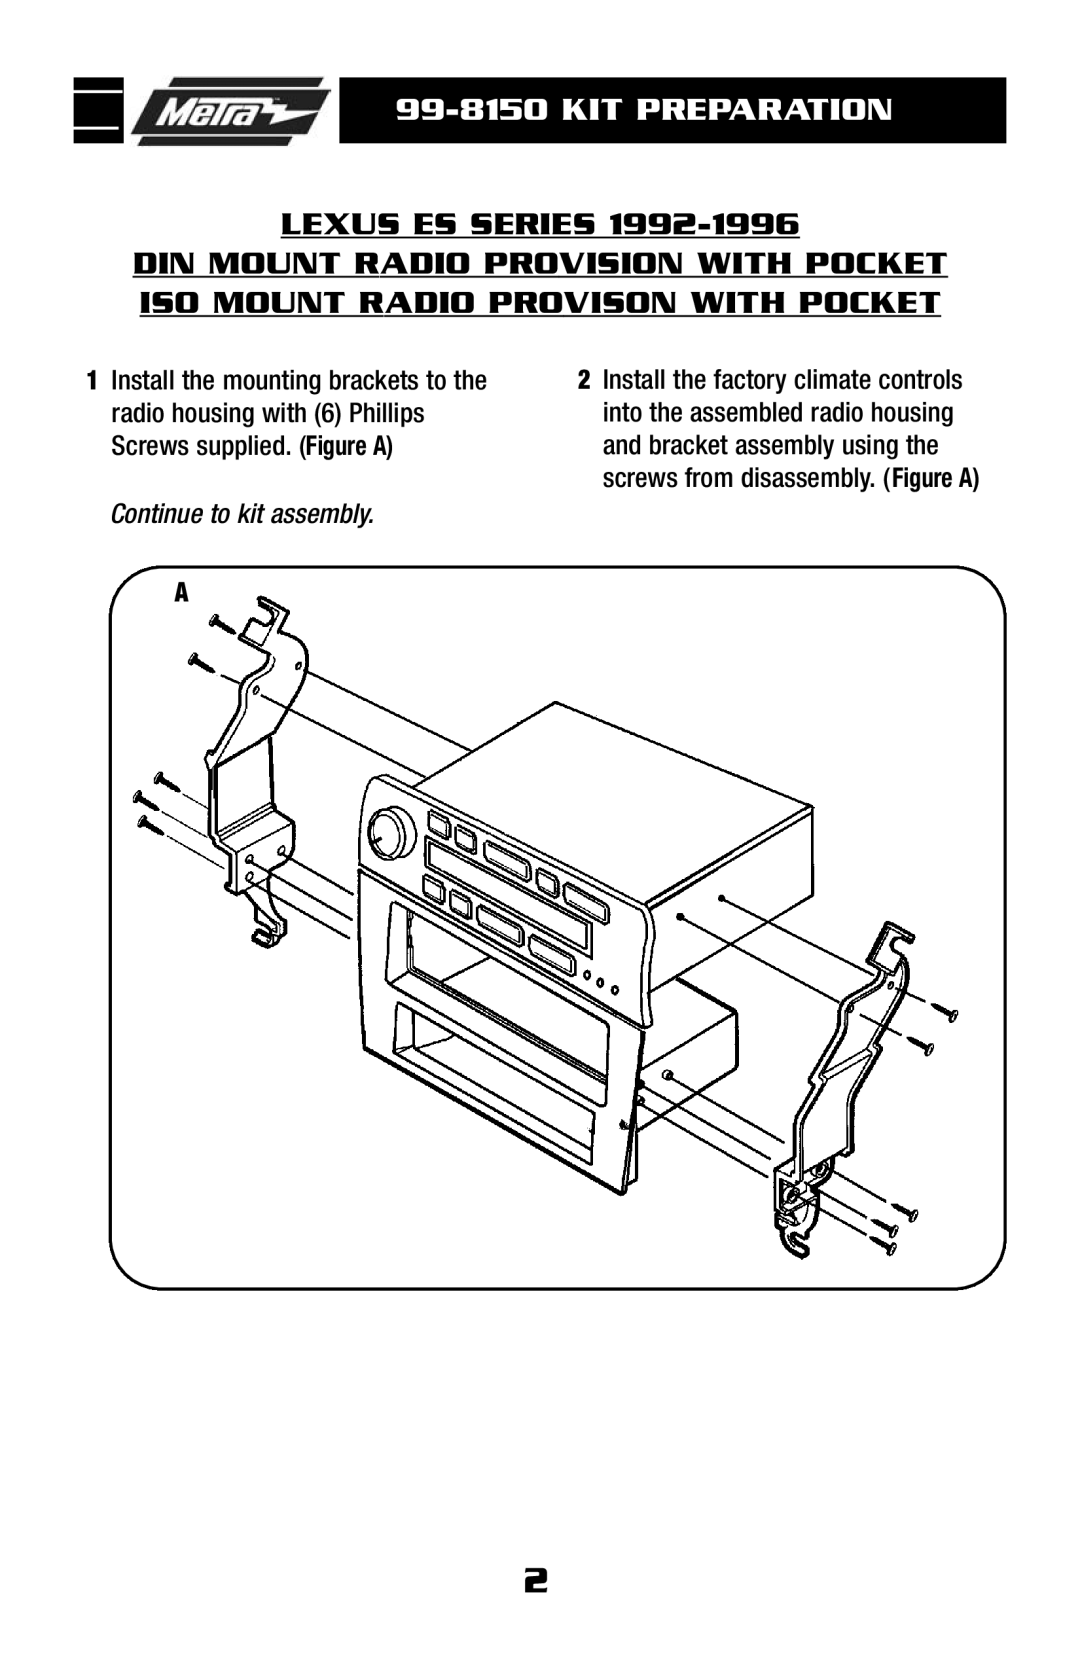 Metra Electronics installation instructions 99-8150KIT PREPARATION, Lexus Es Series, Continue to kit assembly 